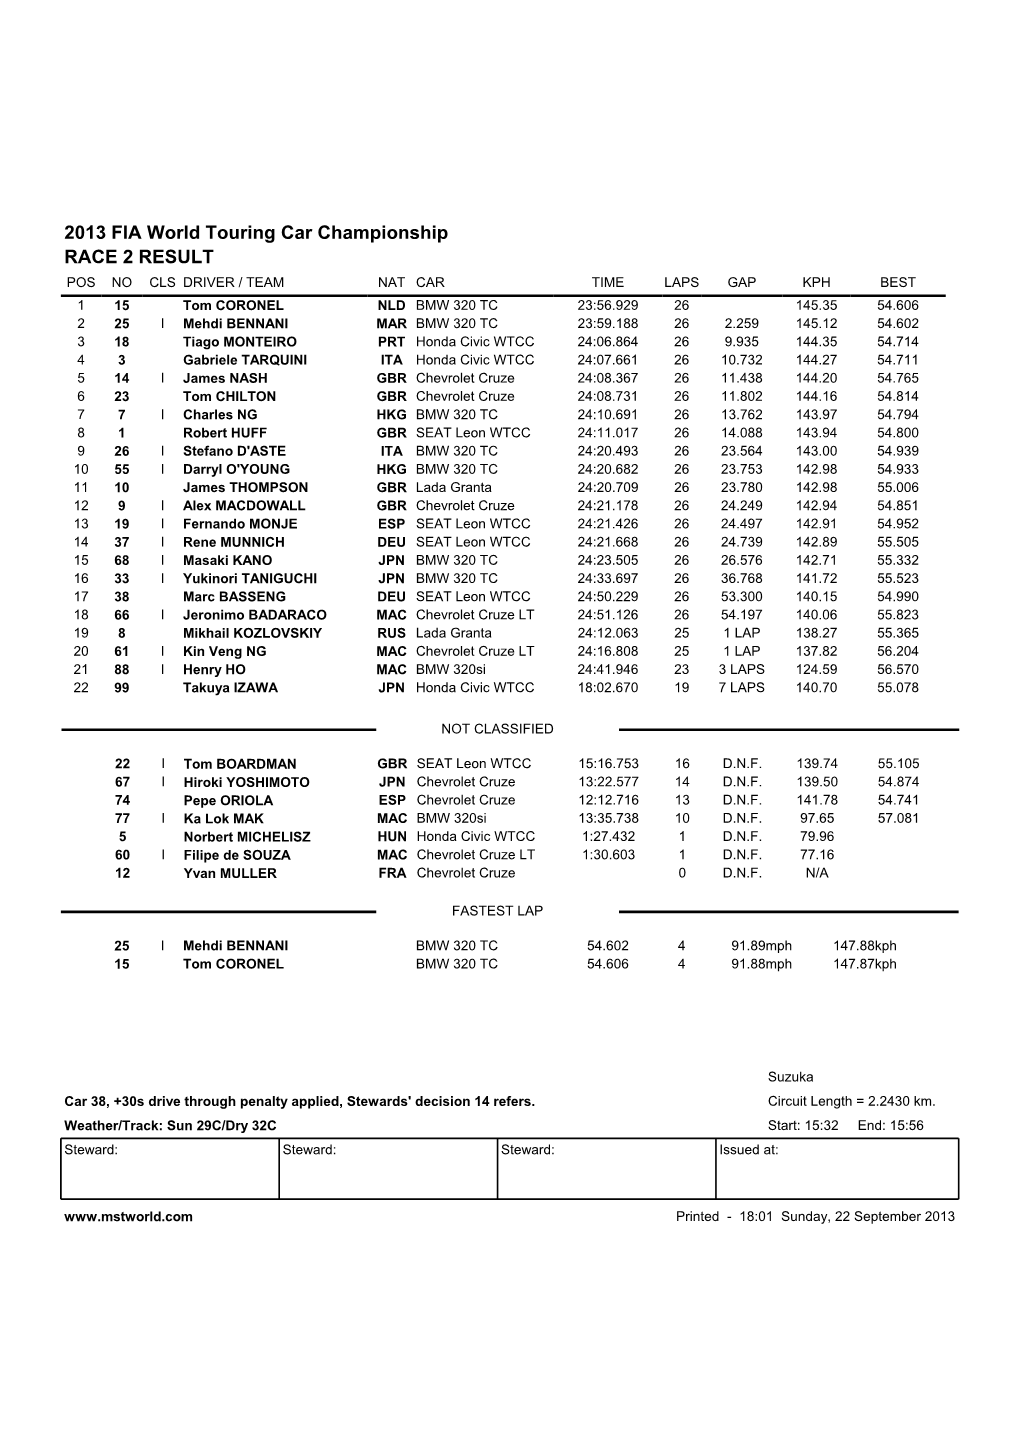 RACE 2 RESULT 2013 FIA World Touring Car